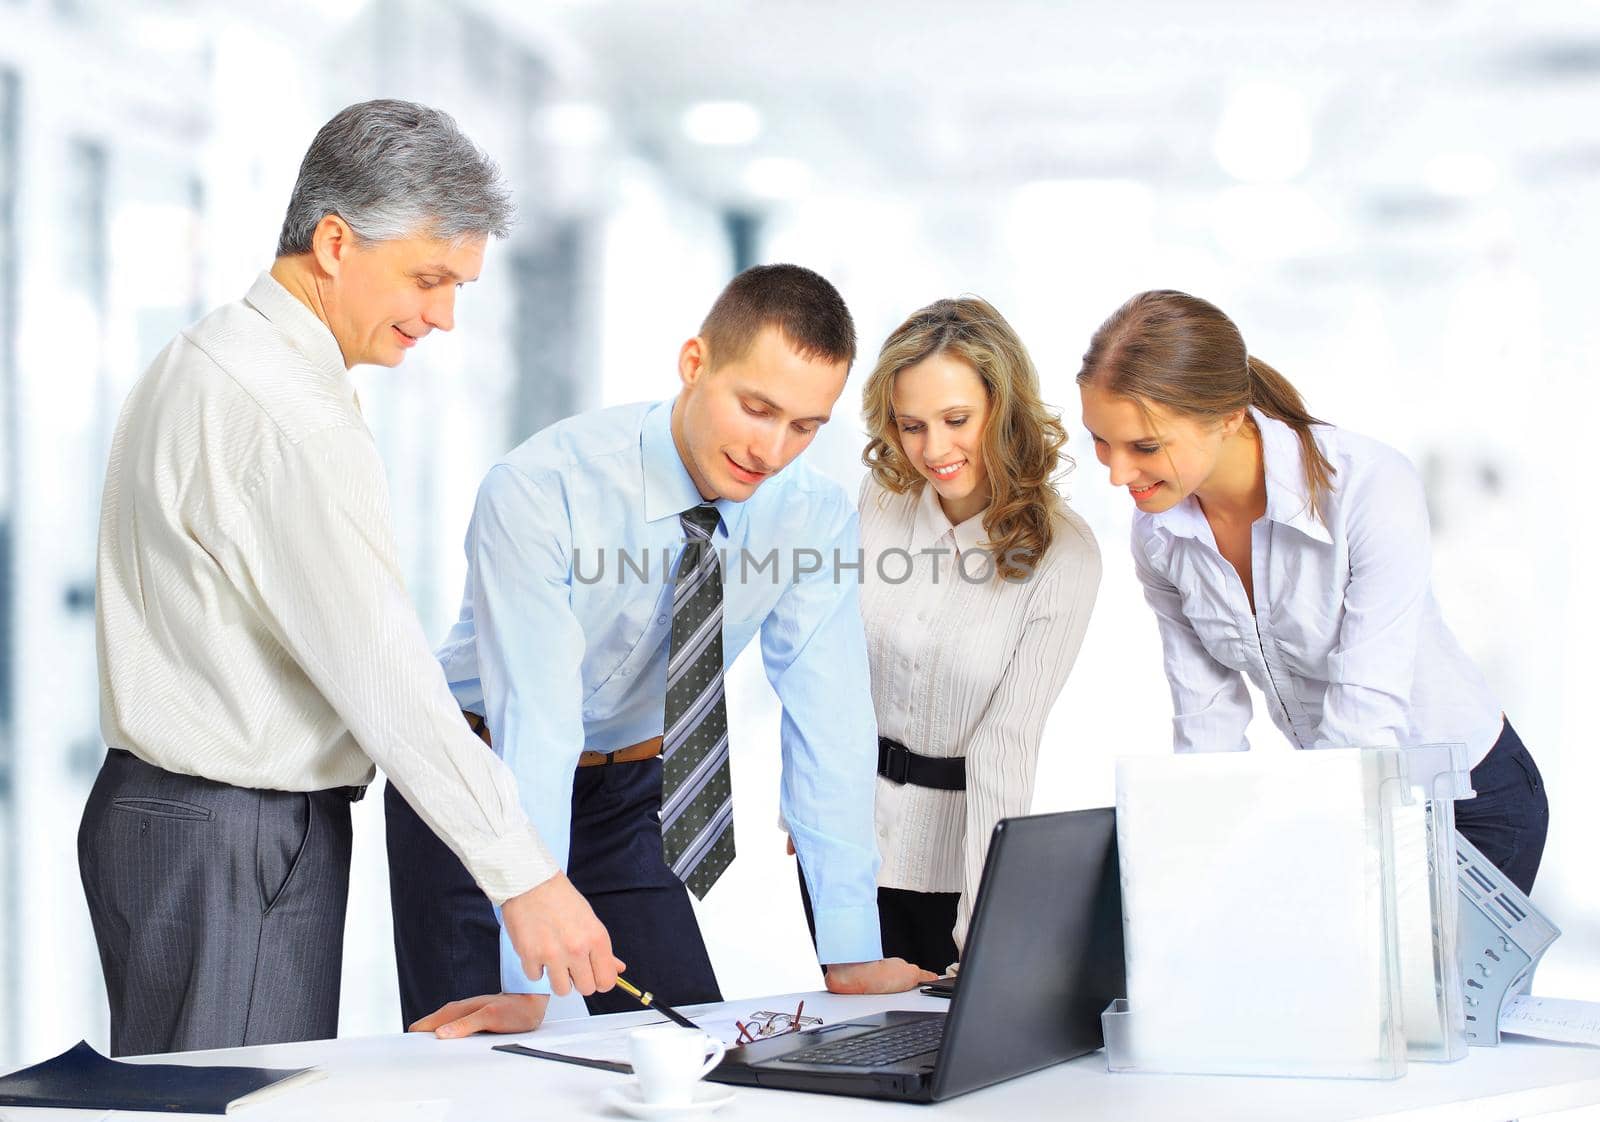 business and office concept - business team having meeting in office